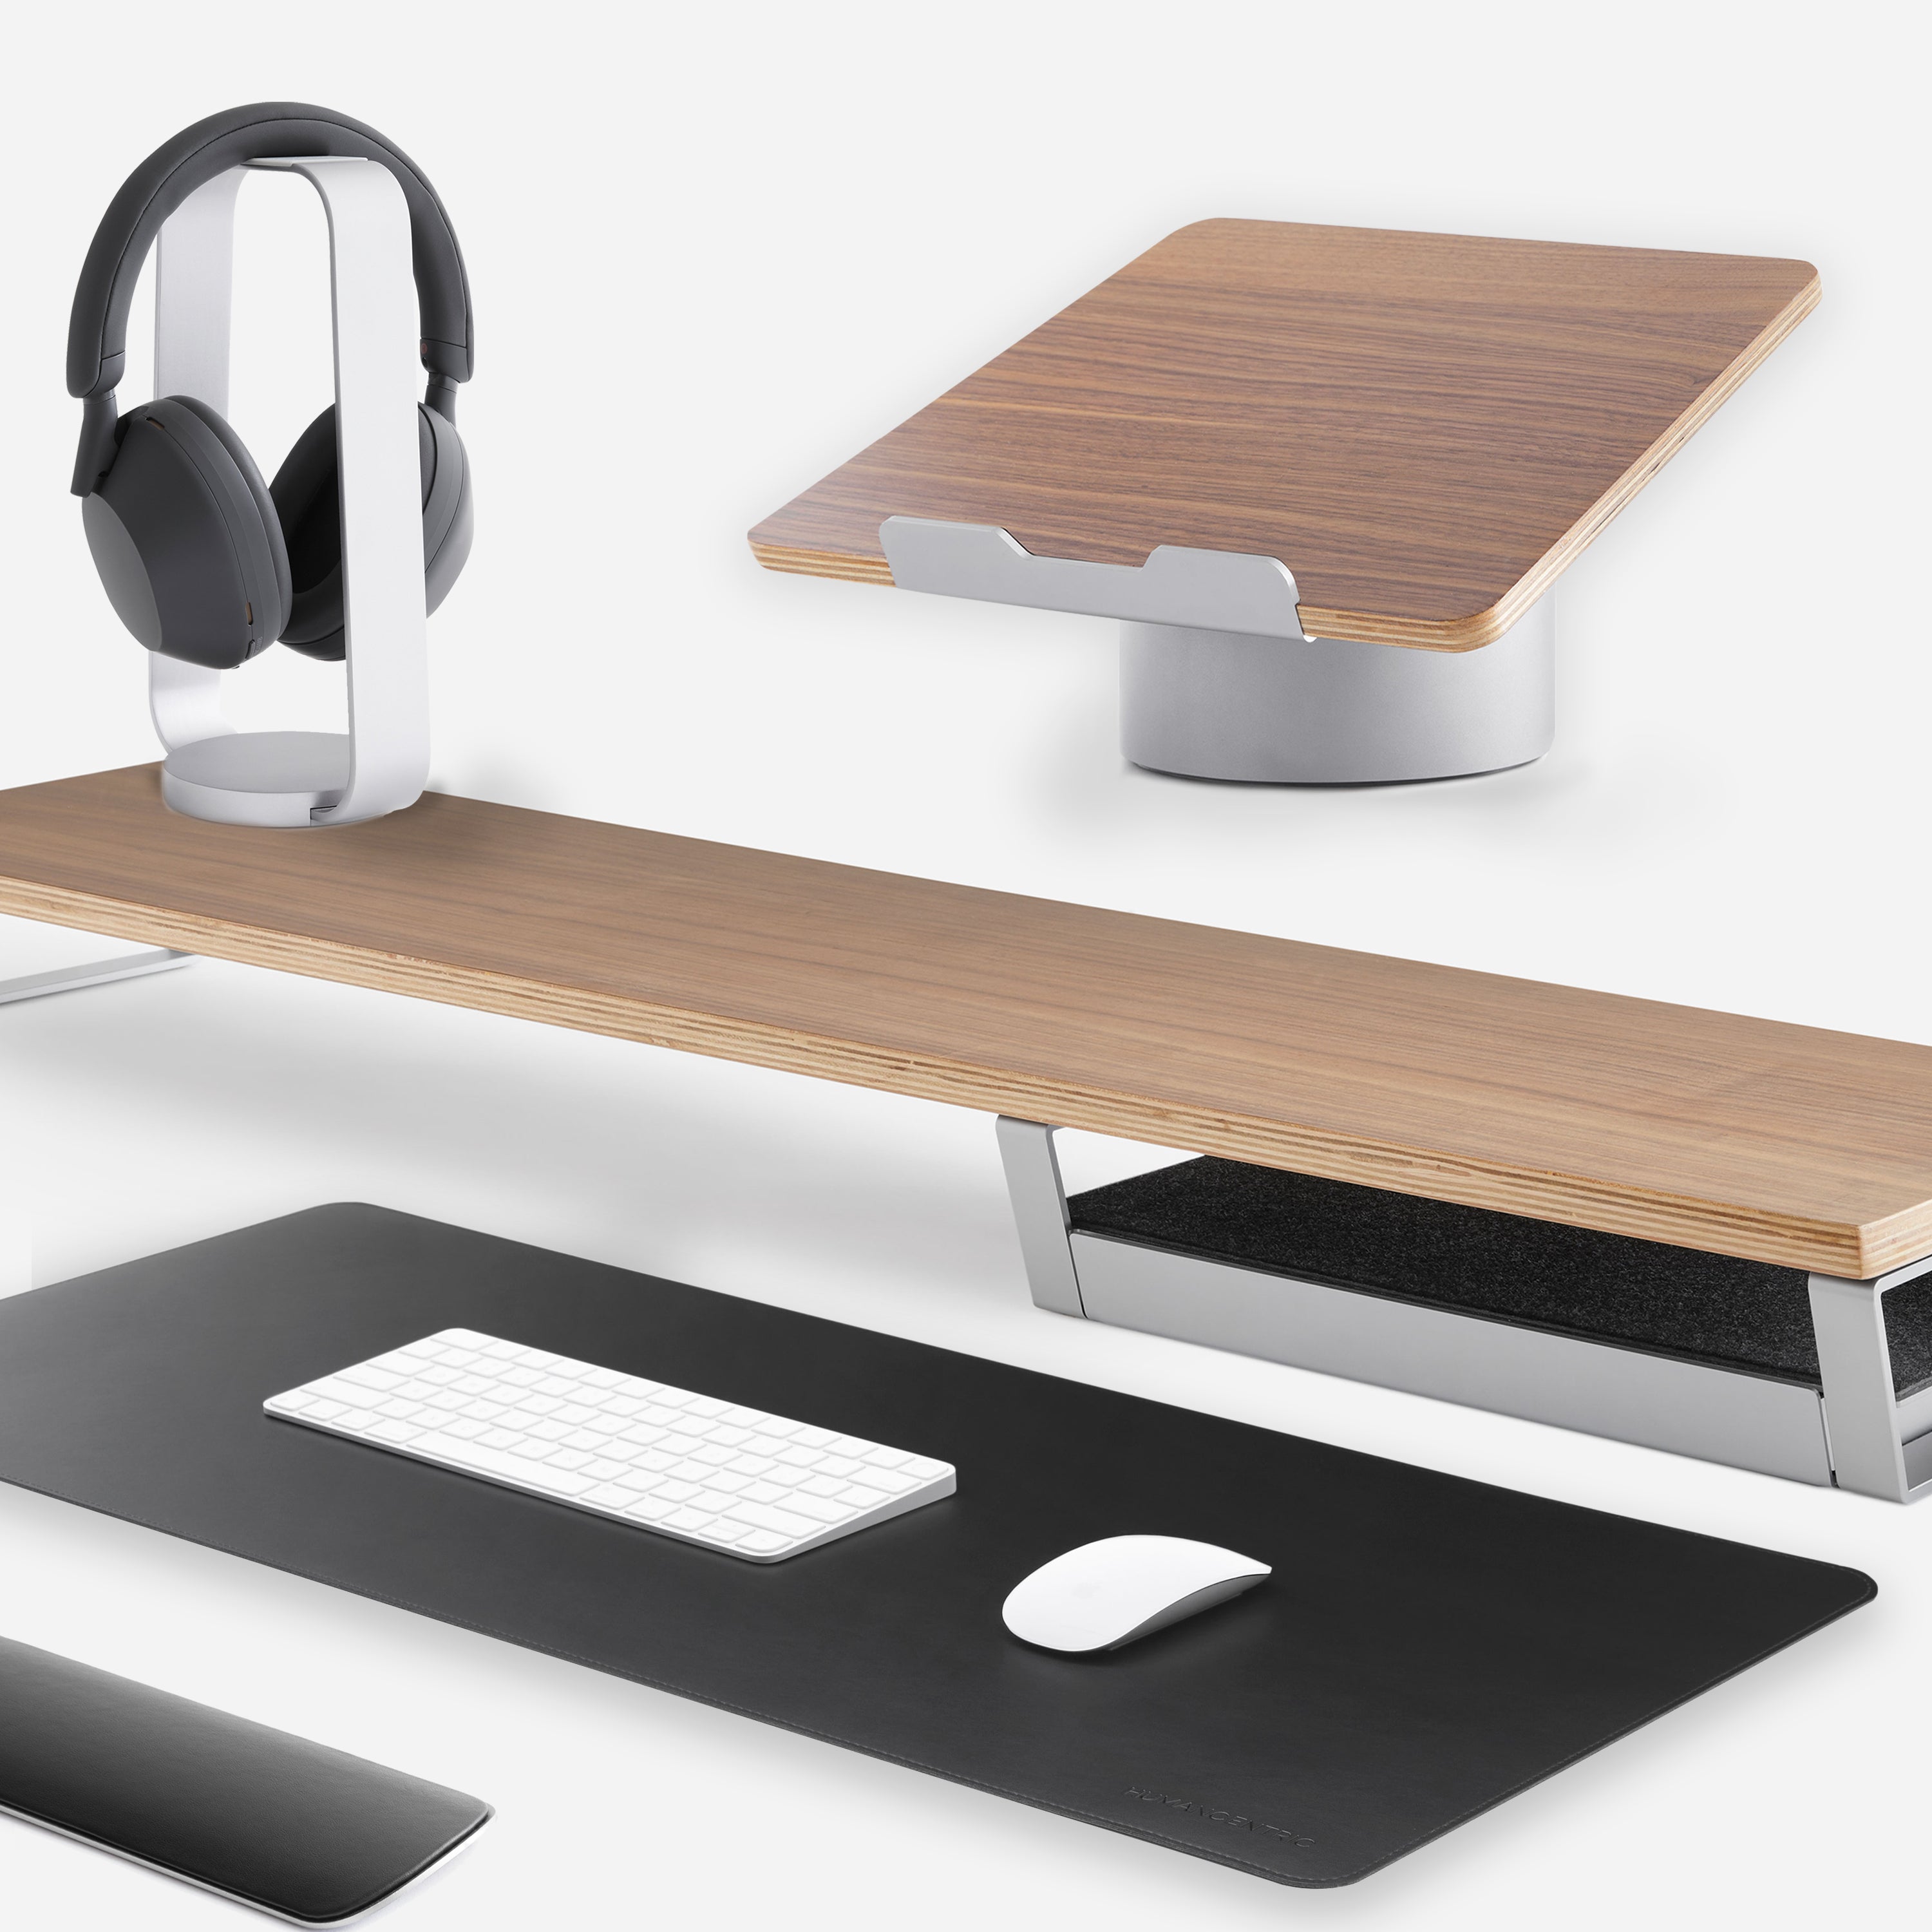 The HumanCentric Stick-On Desk Drawer Will Save So Much Storage Space